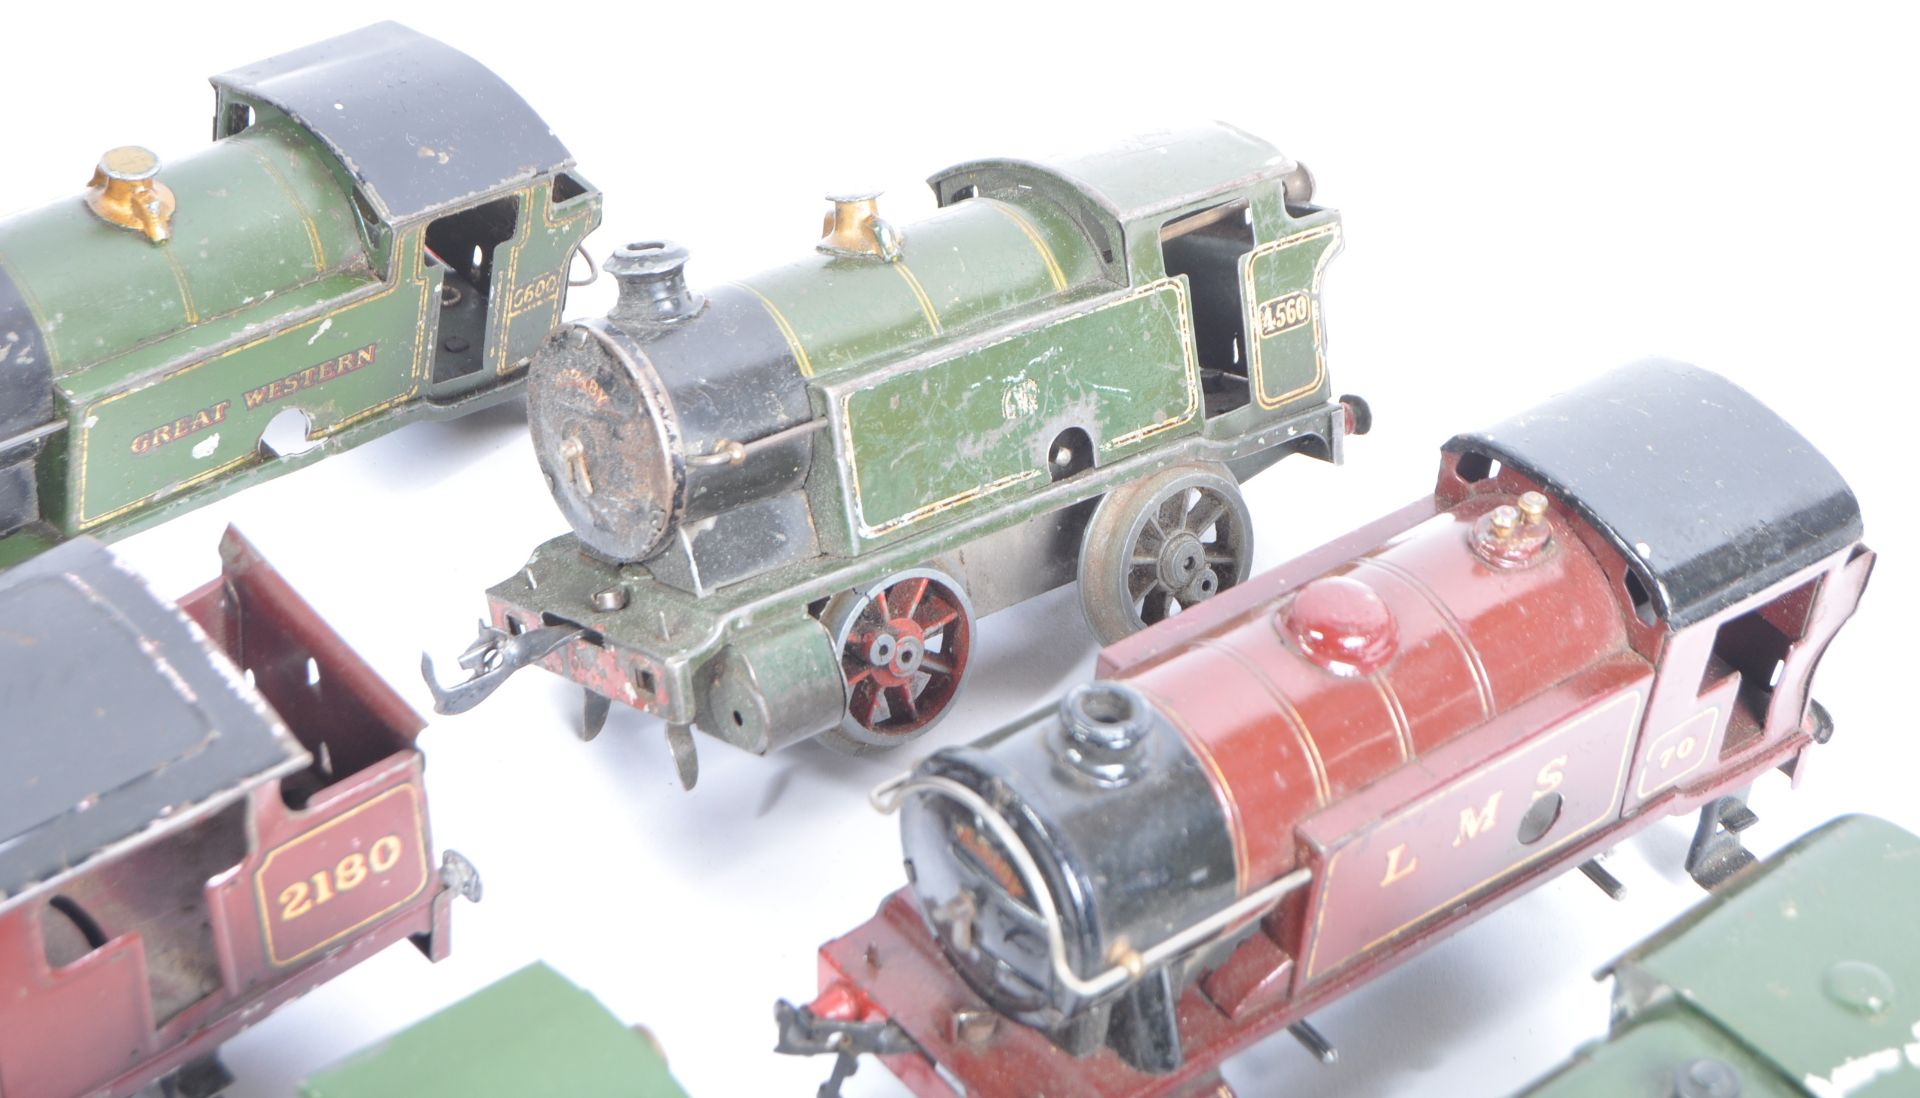 COLLECTION OF HORNBY O GAUGE TINPLATE LOCOMOTIVE BODIES / PARTS - Image 6 of 9